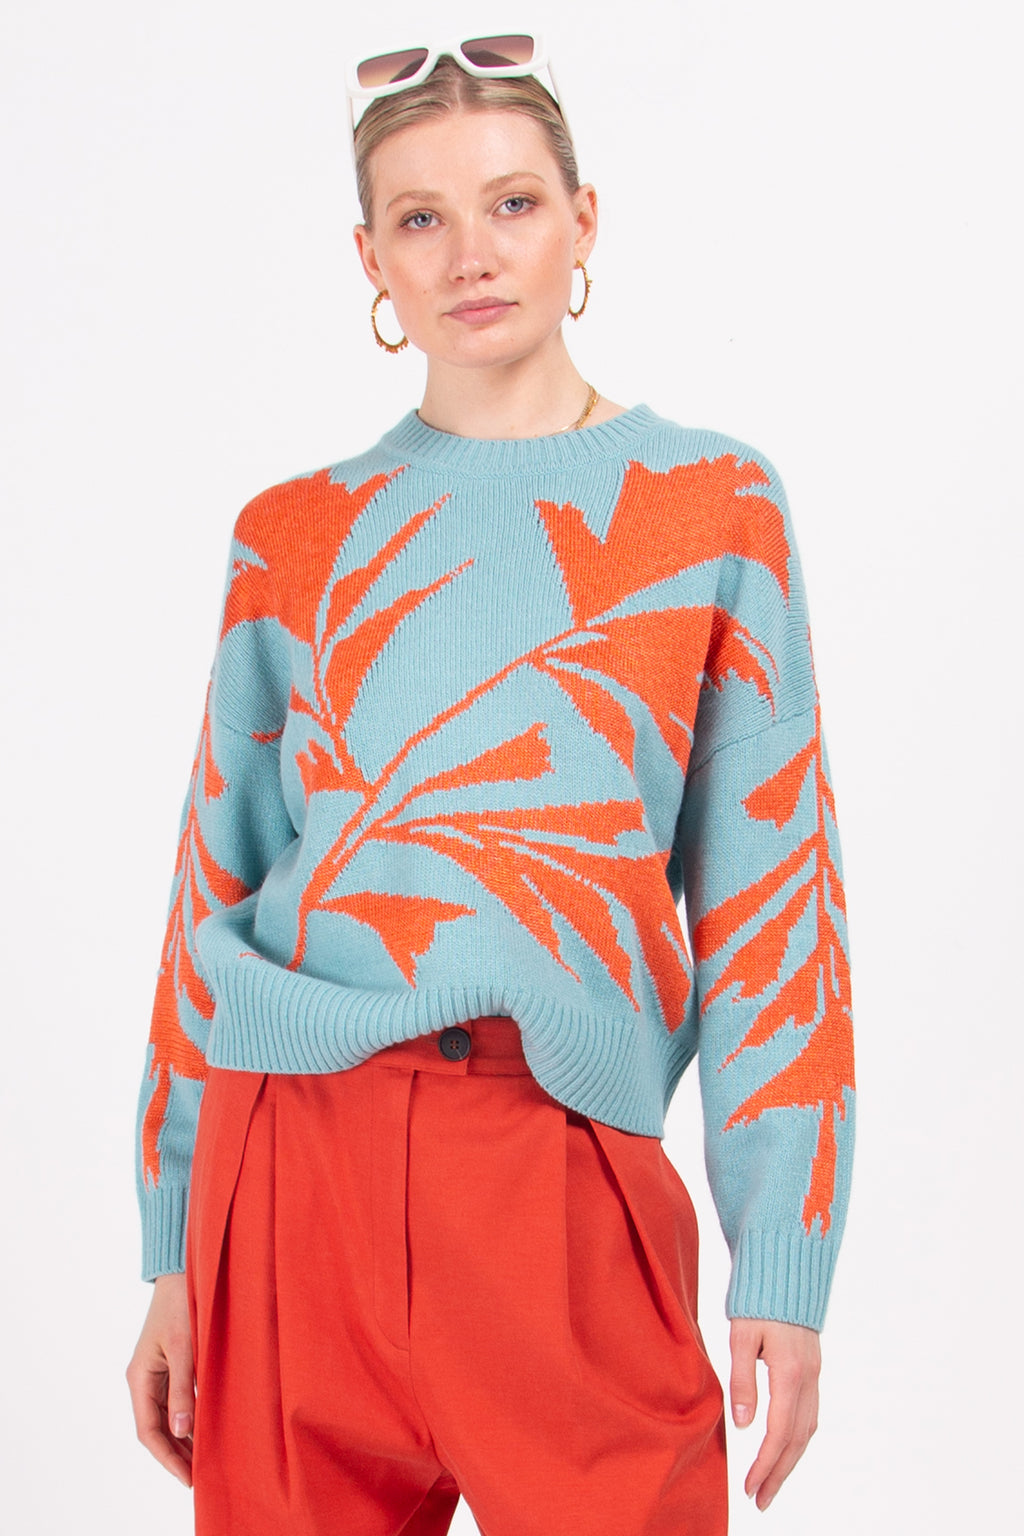 Mata knitted sweater with orange leaf